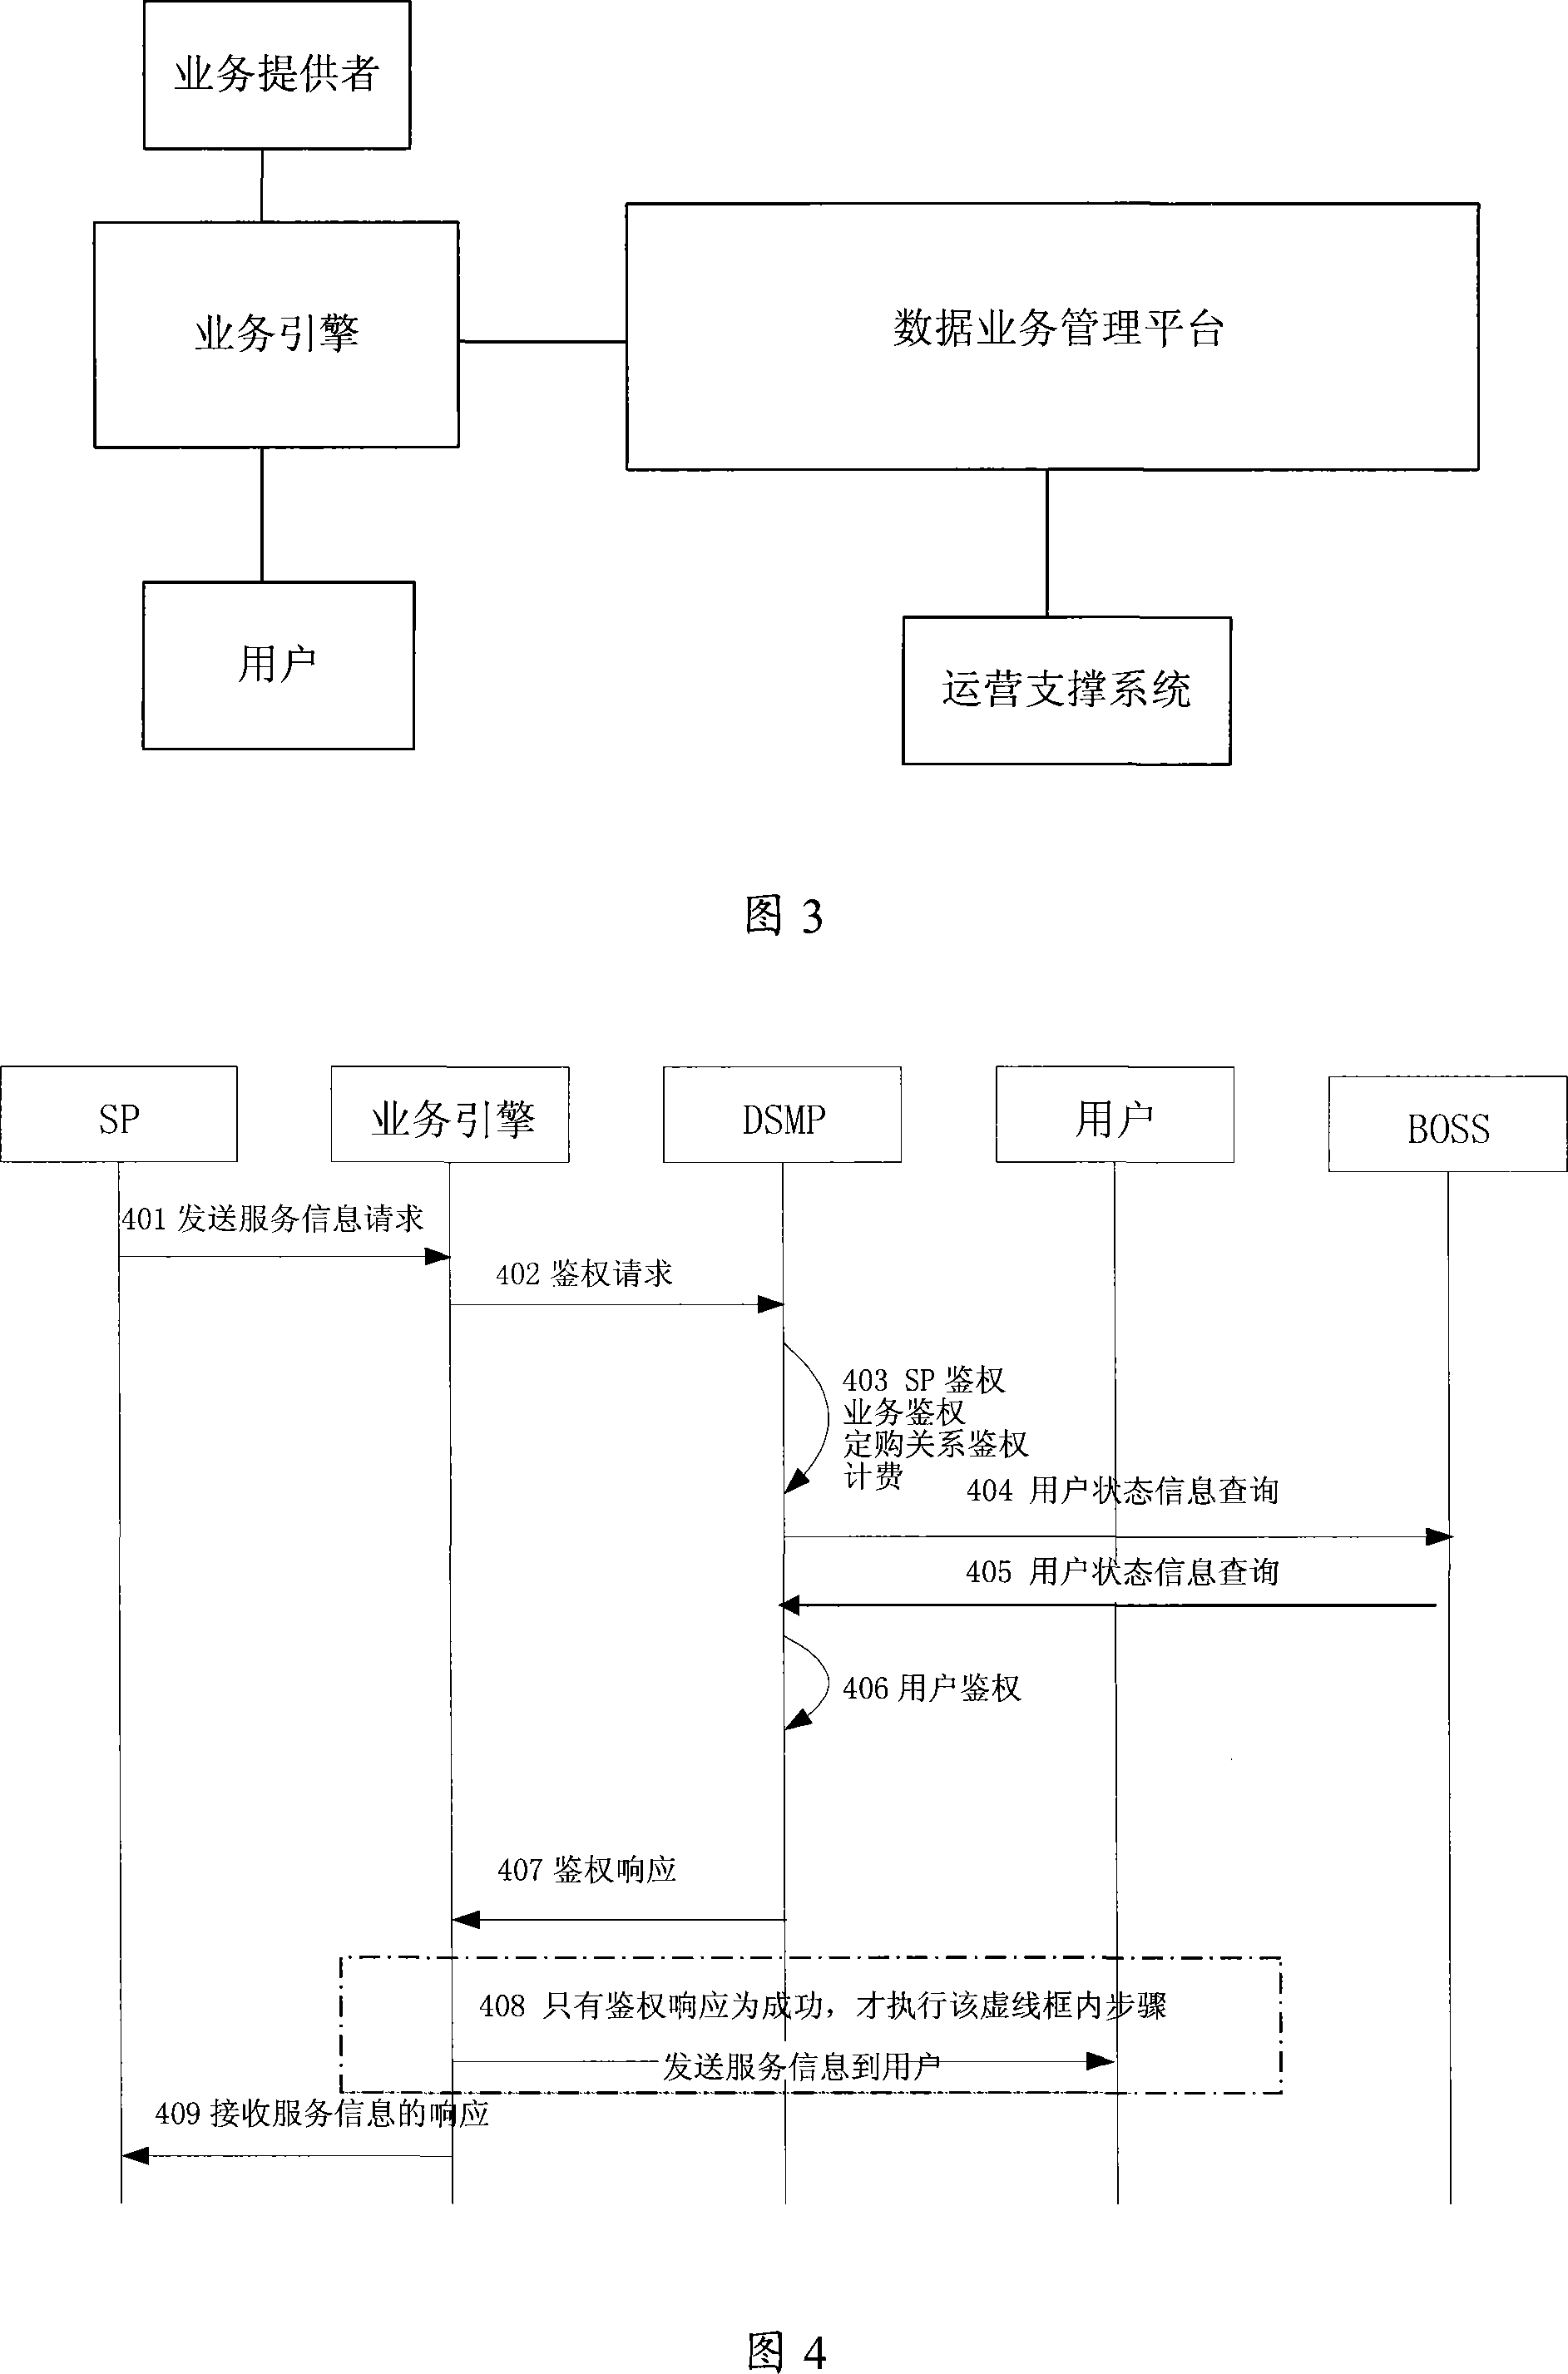 Method and system for providing mobile data business